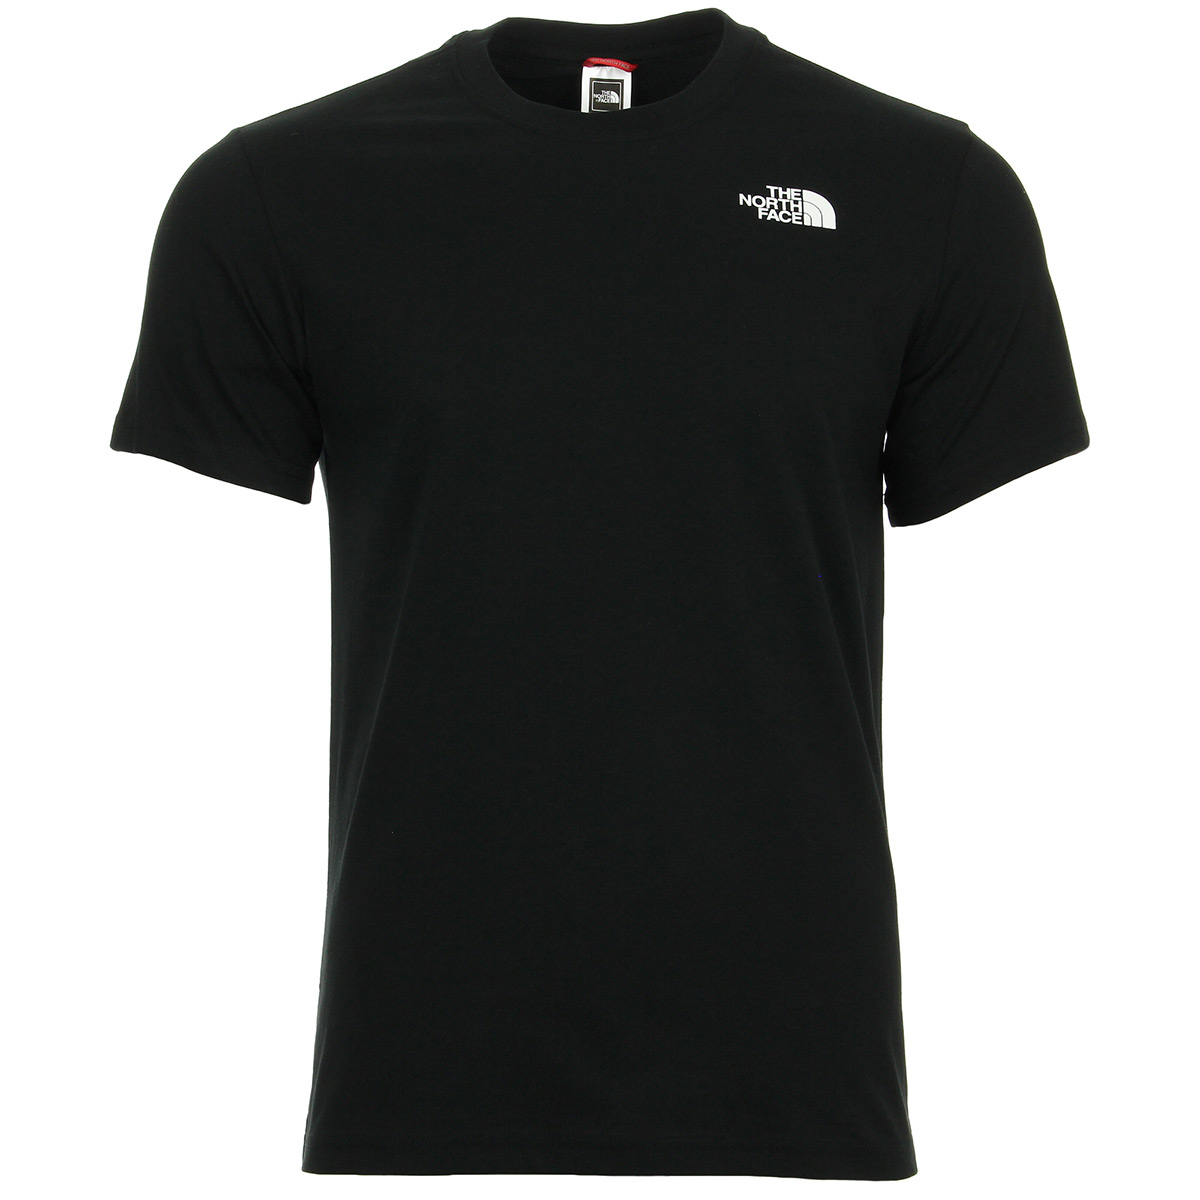 The North Face S/S Red Box Tee